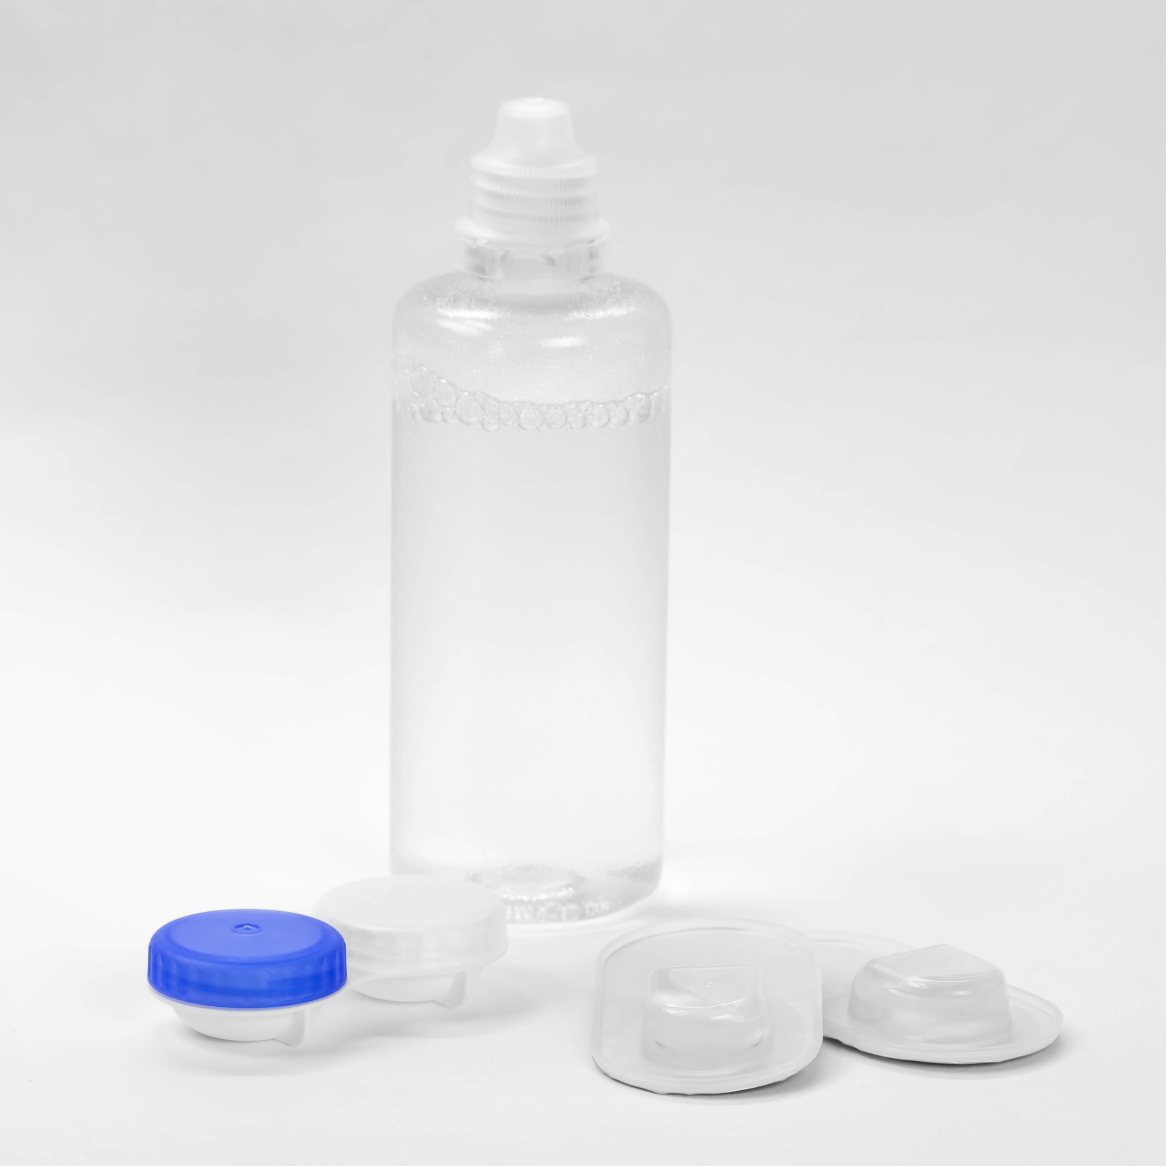 A contact solution bottle pictured with a contact storage case